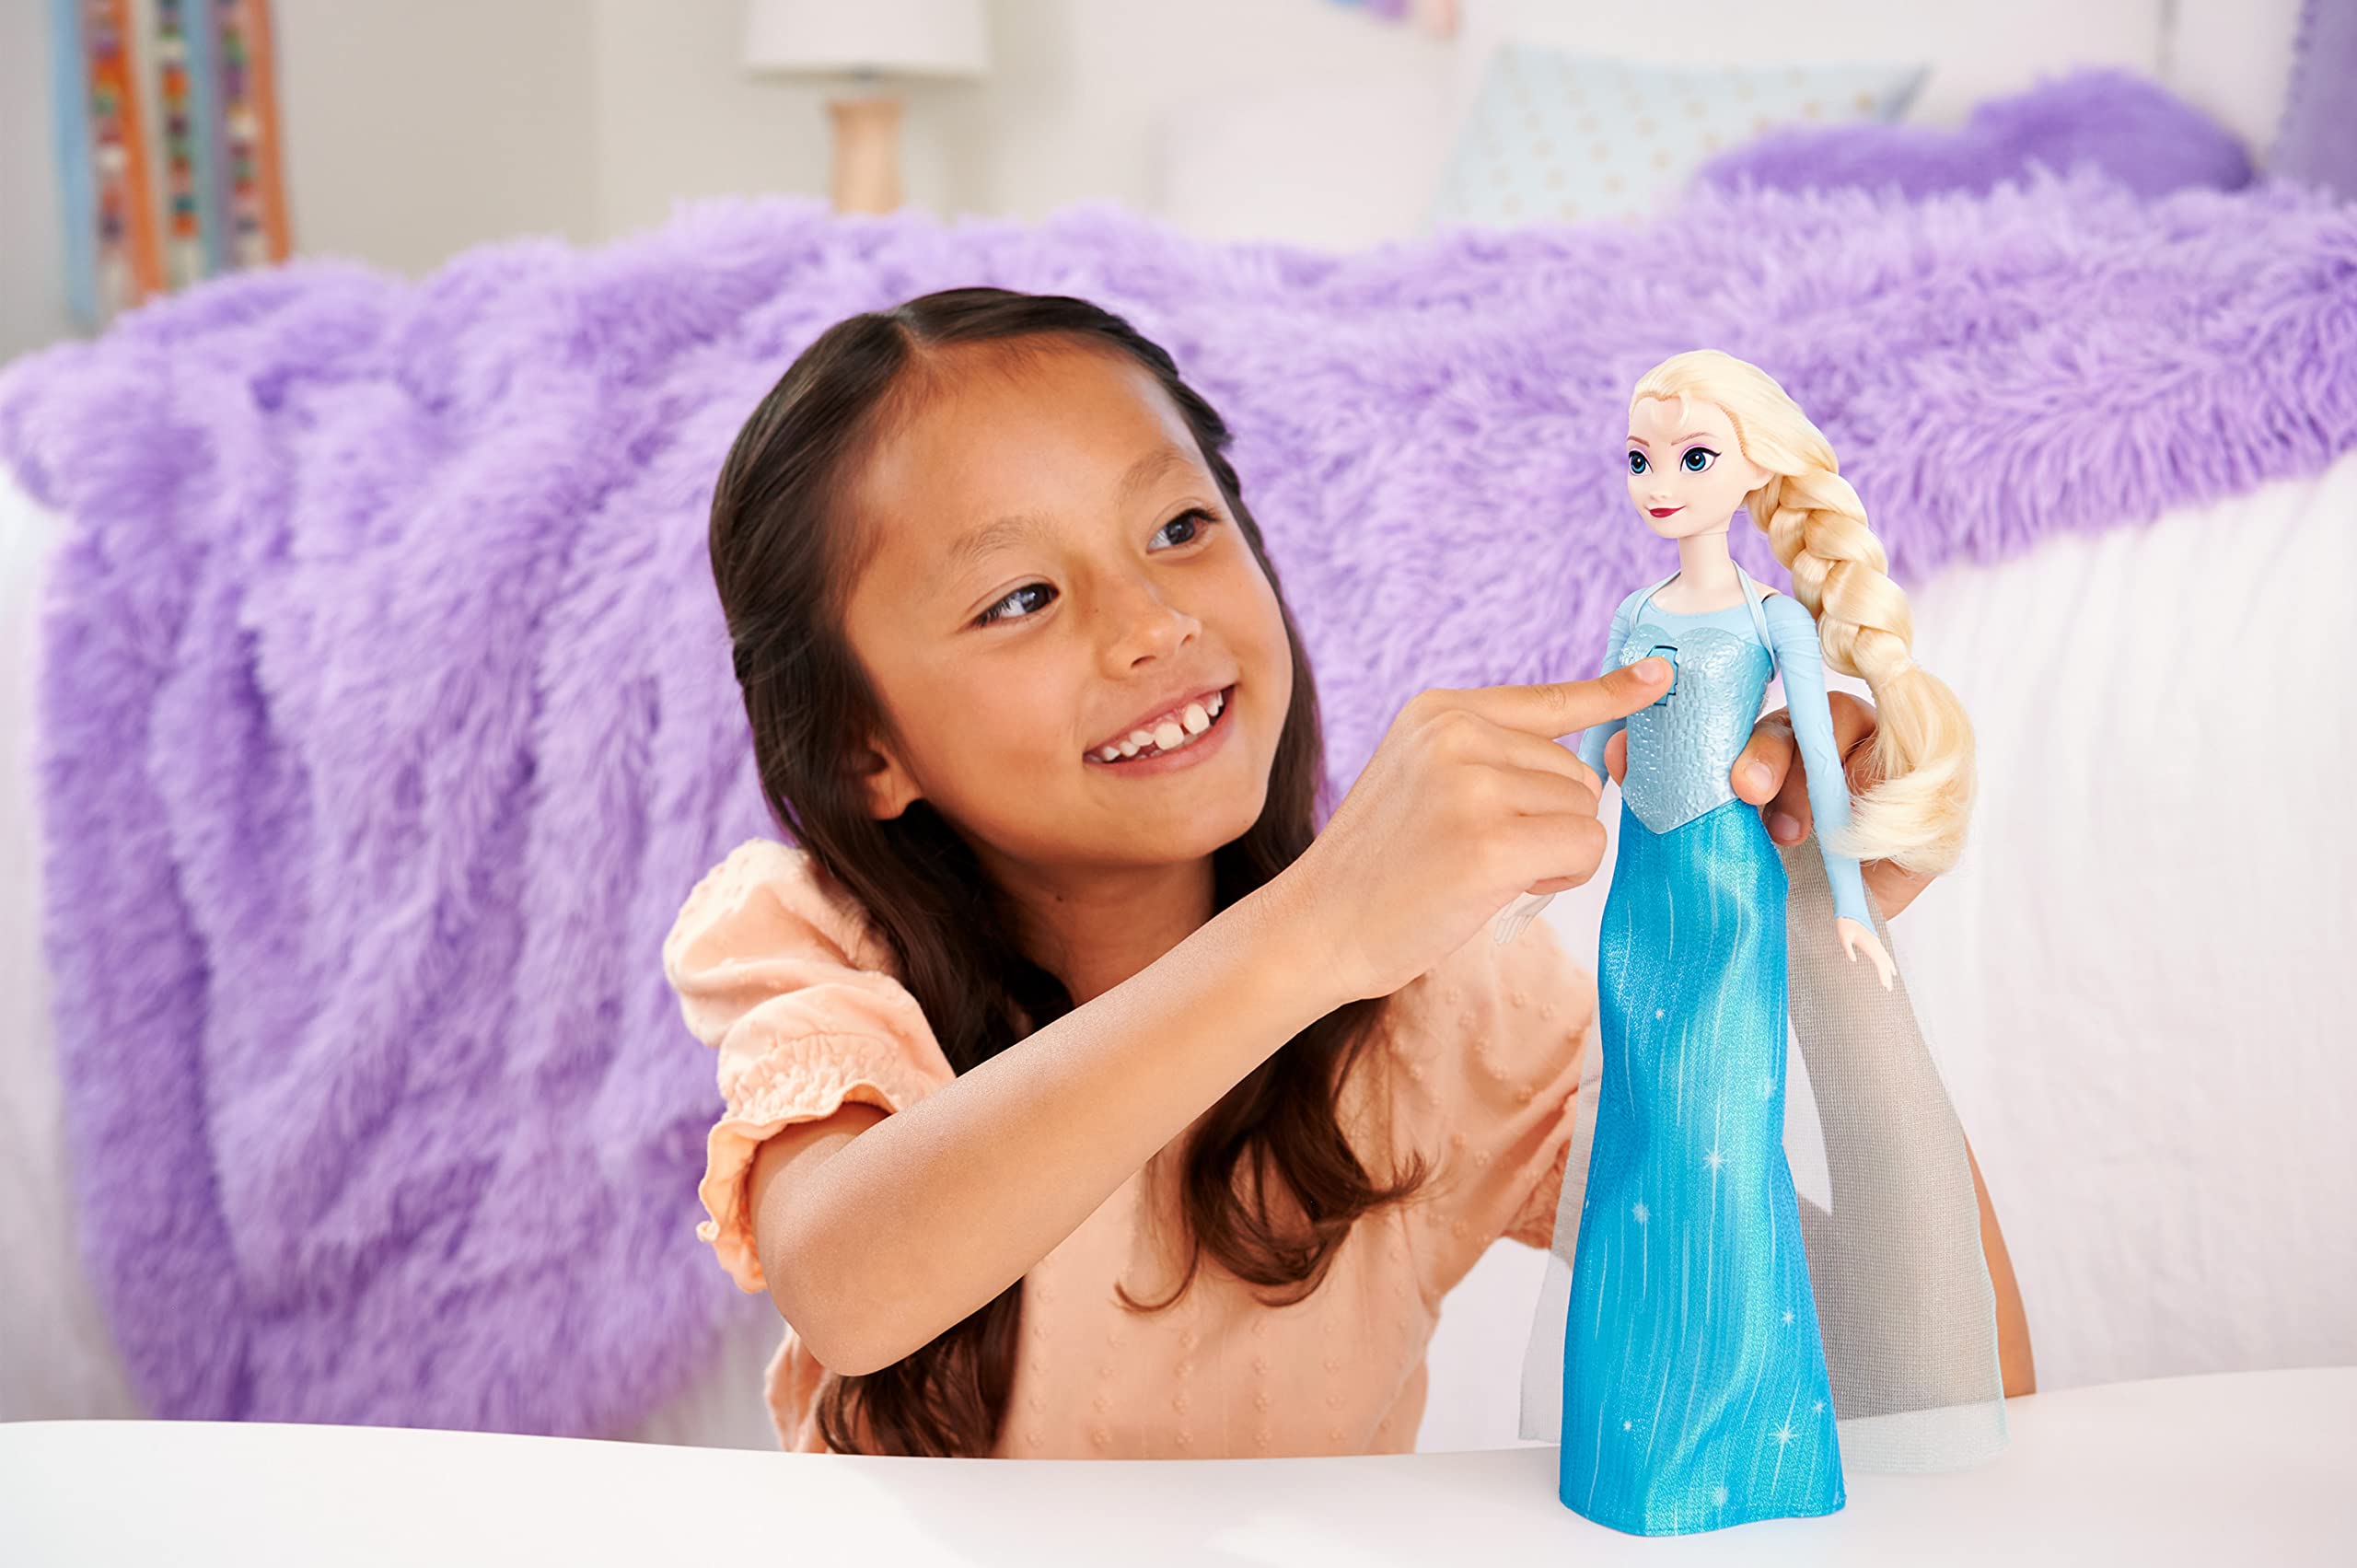 Disney Frozen Toys, Singing Elsa Doll in Signature Clothing, Sings “Let It Go” from the Disney Movie Frozen